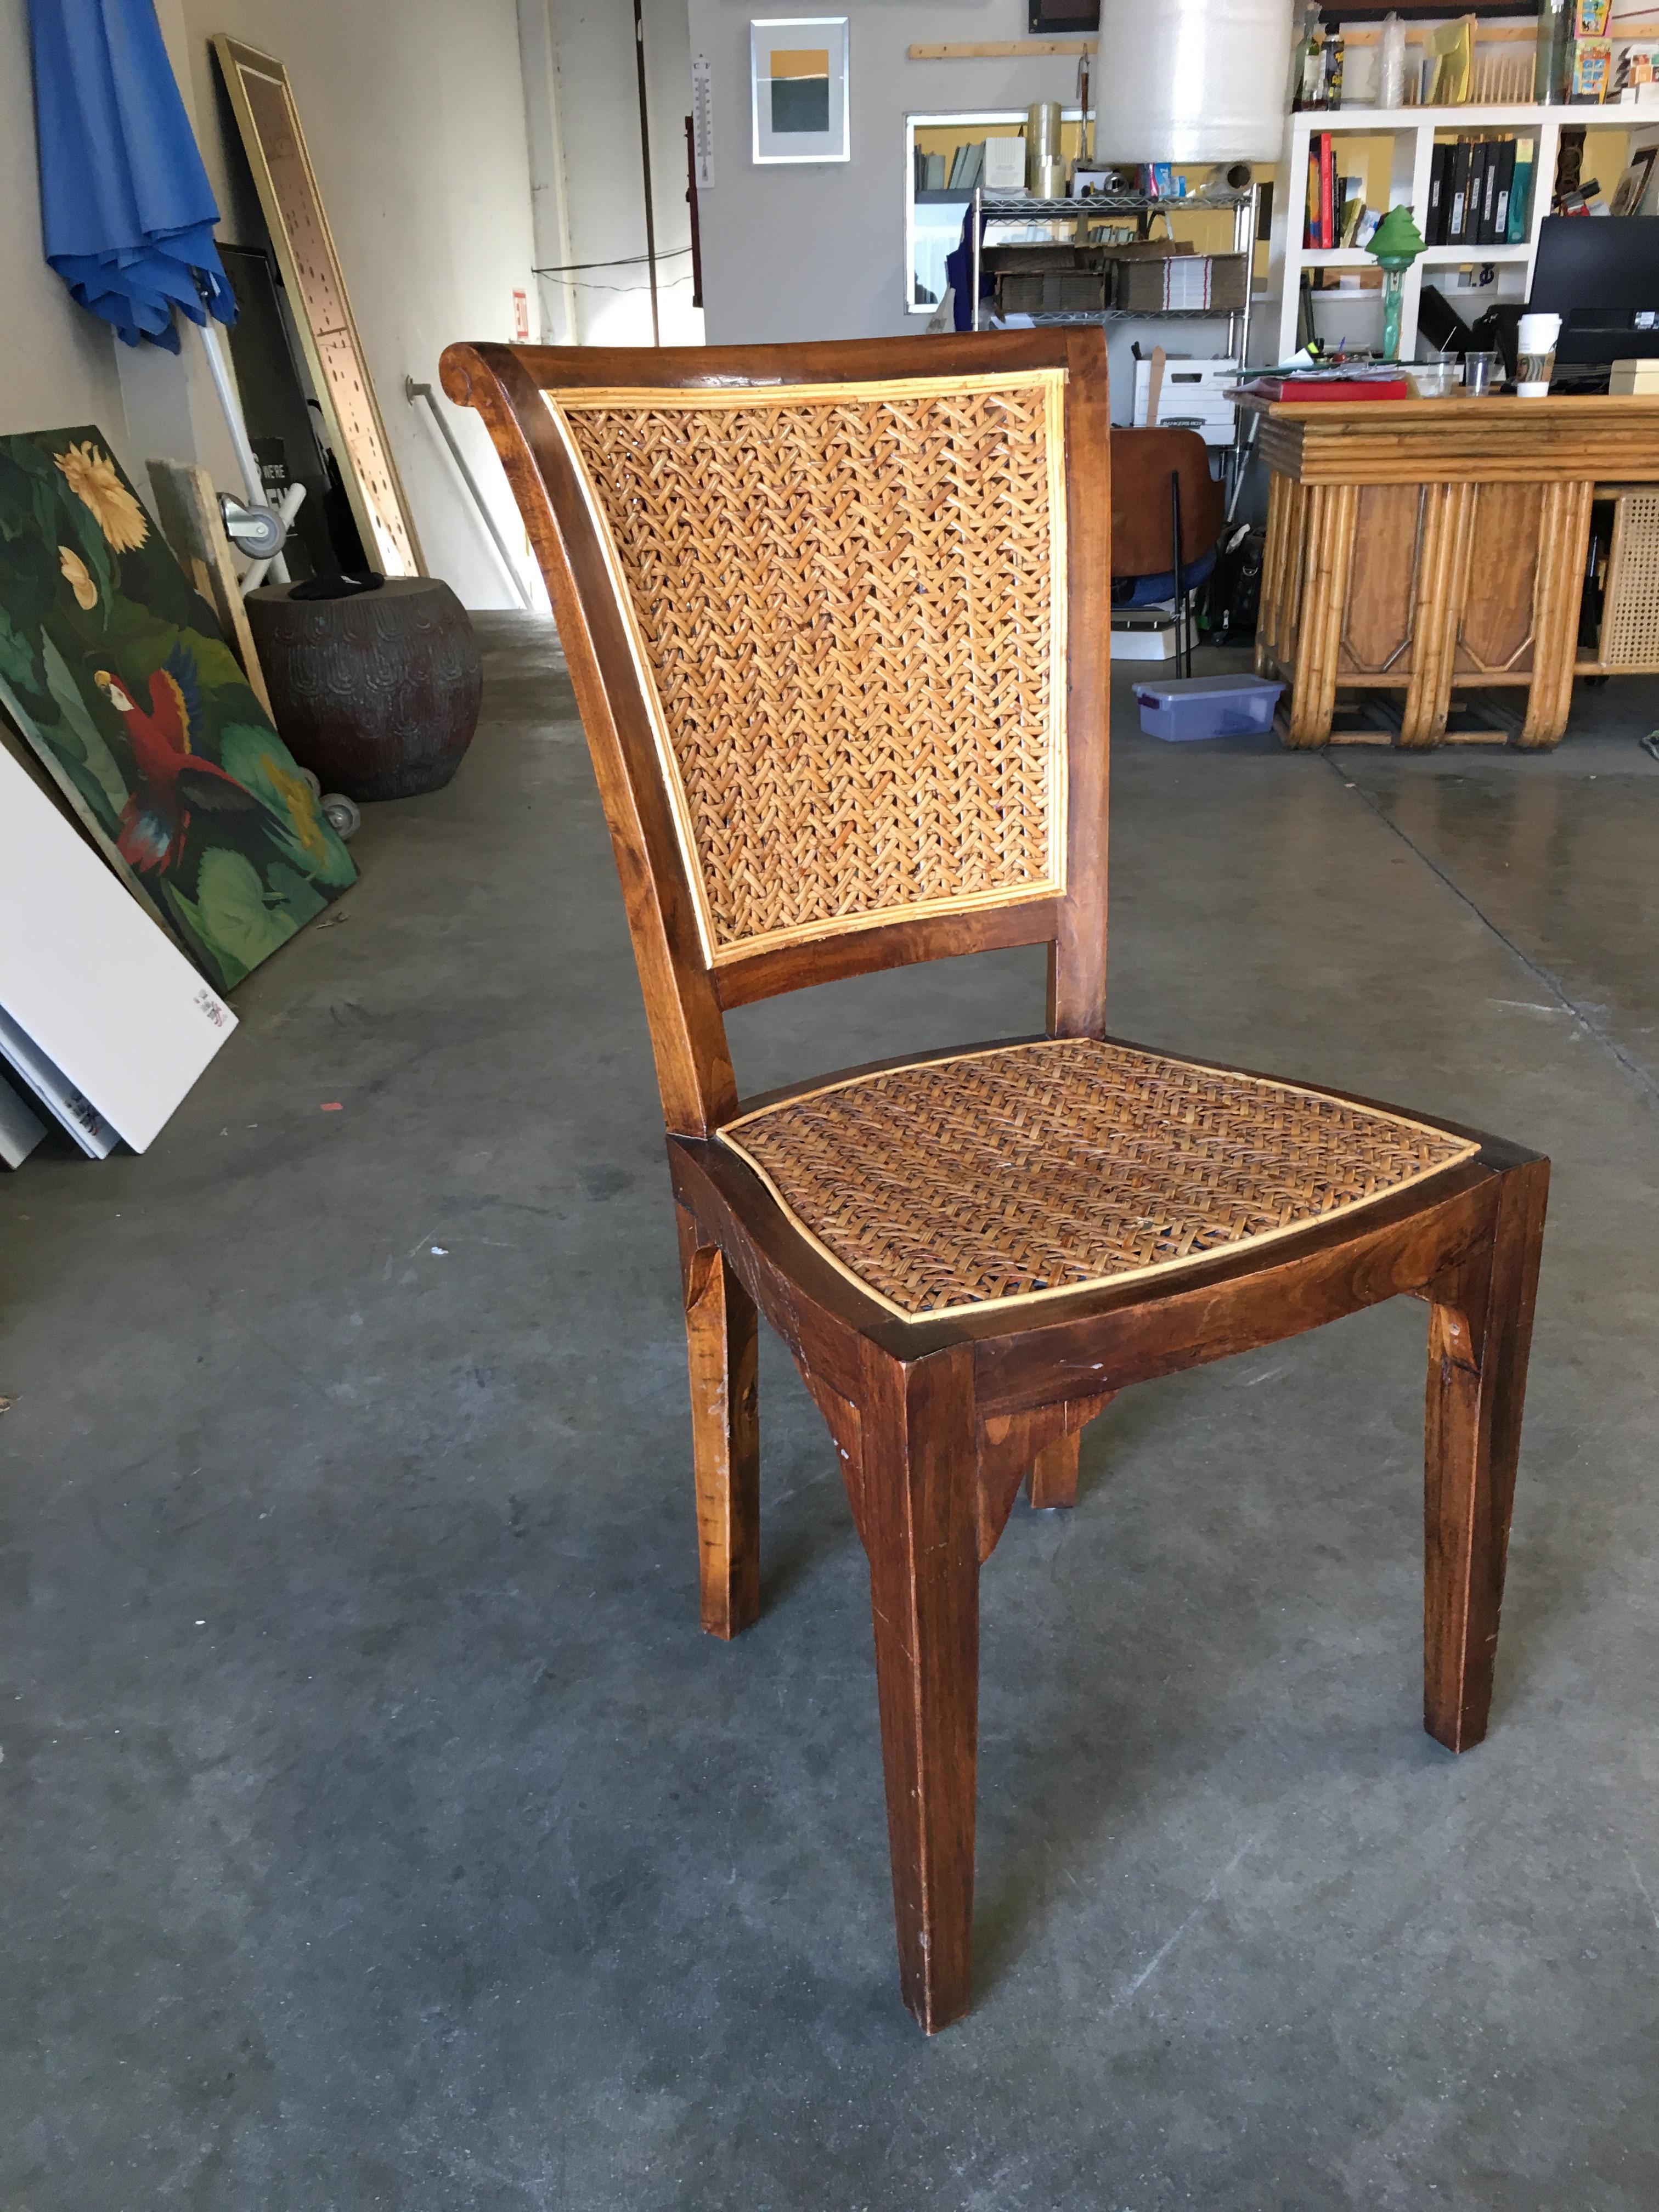 wood chair with wicker seat